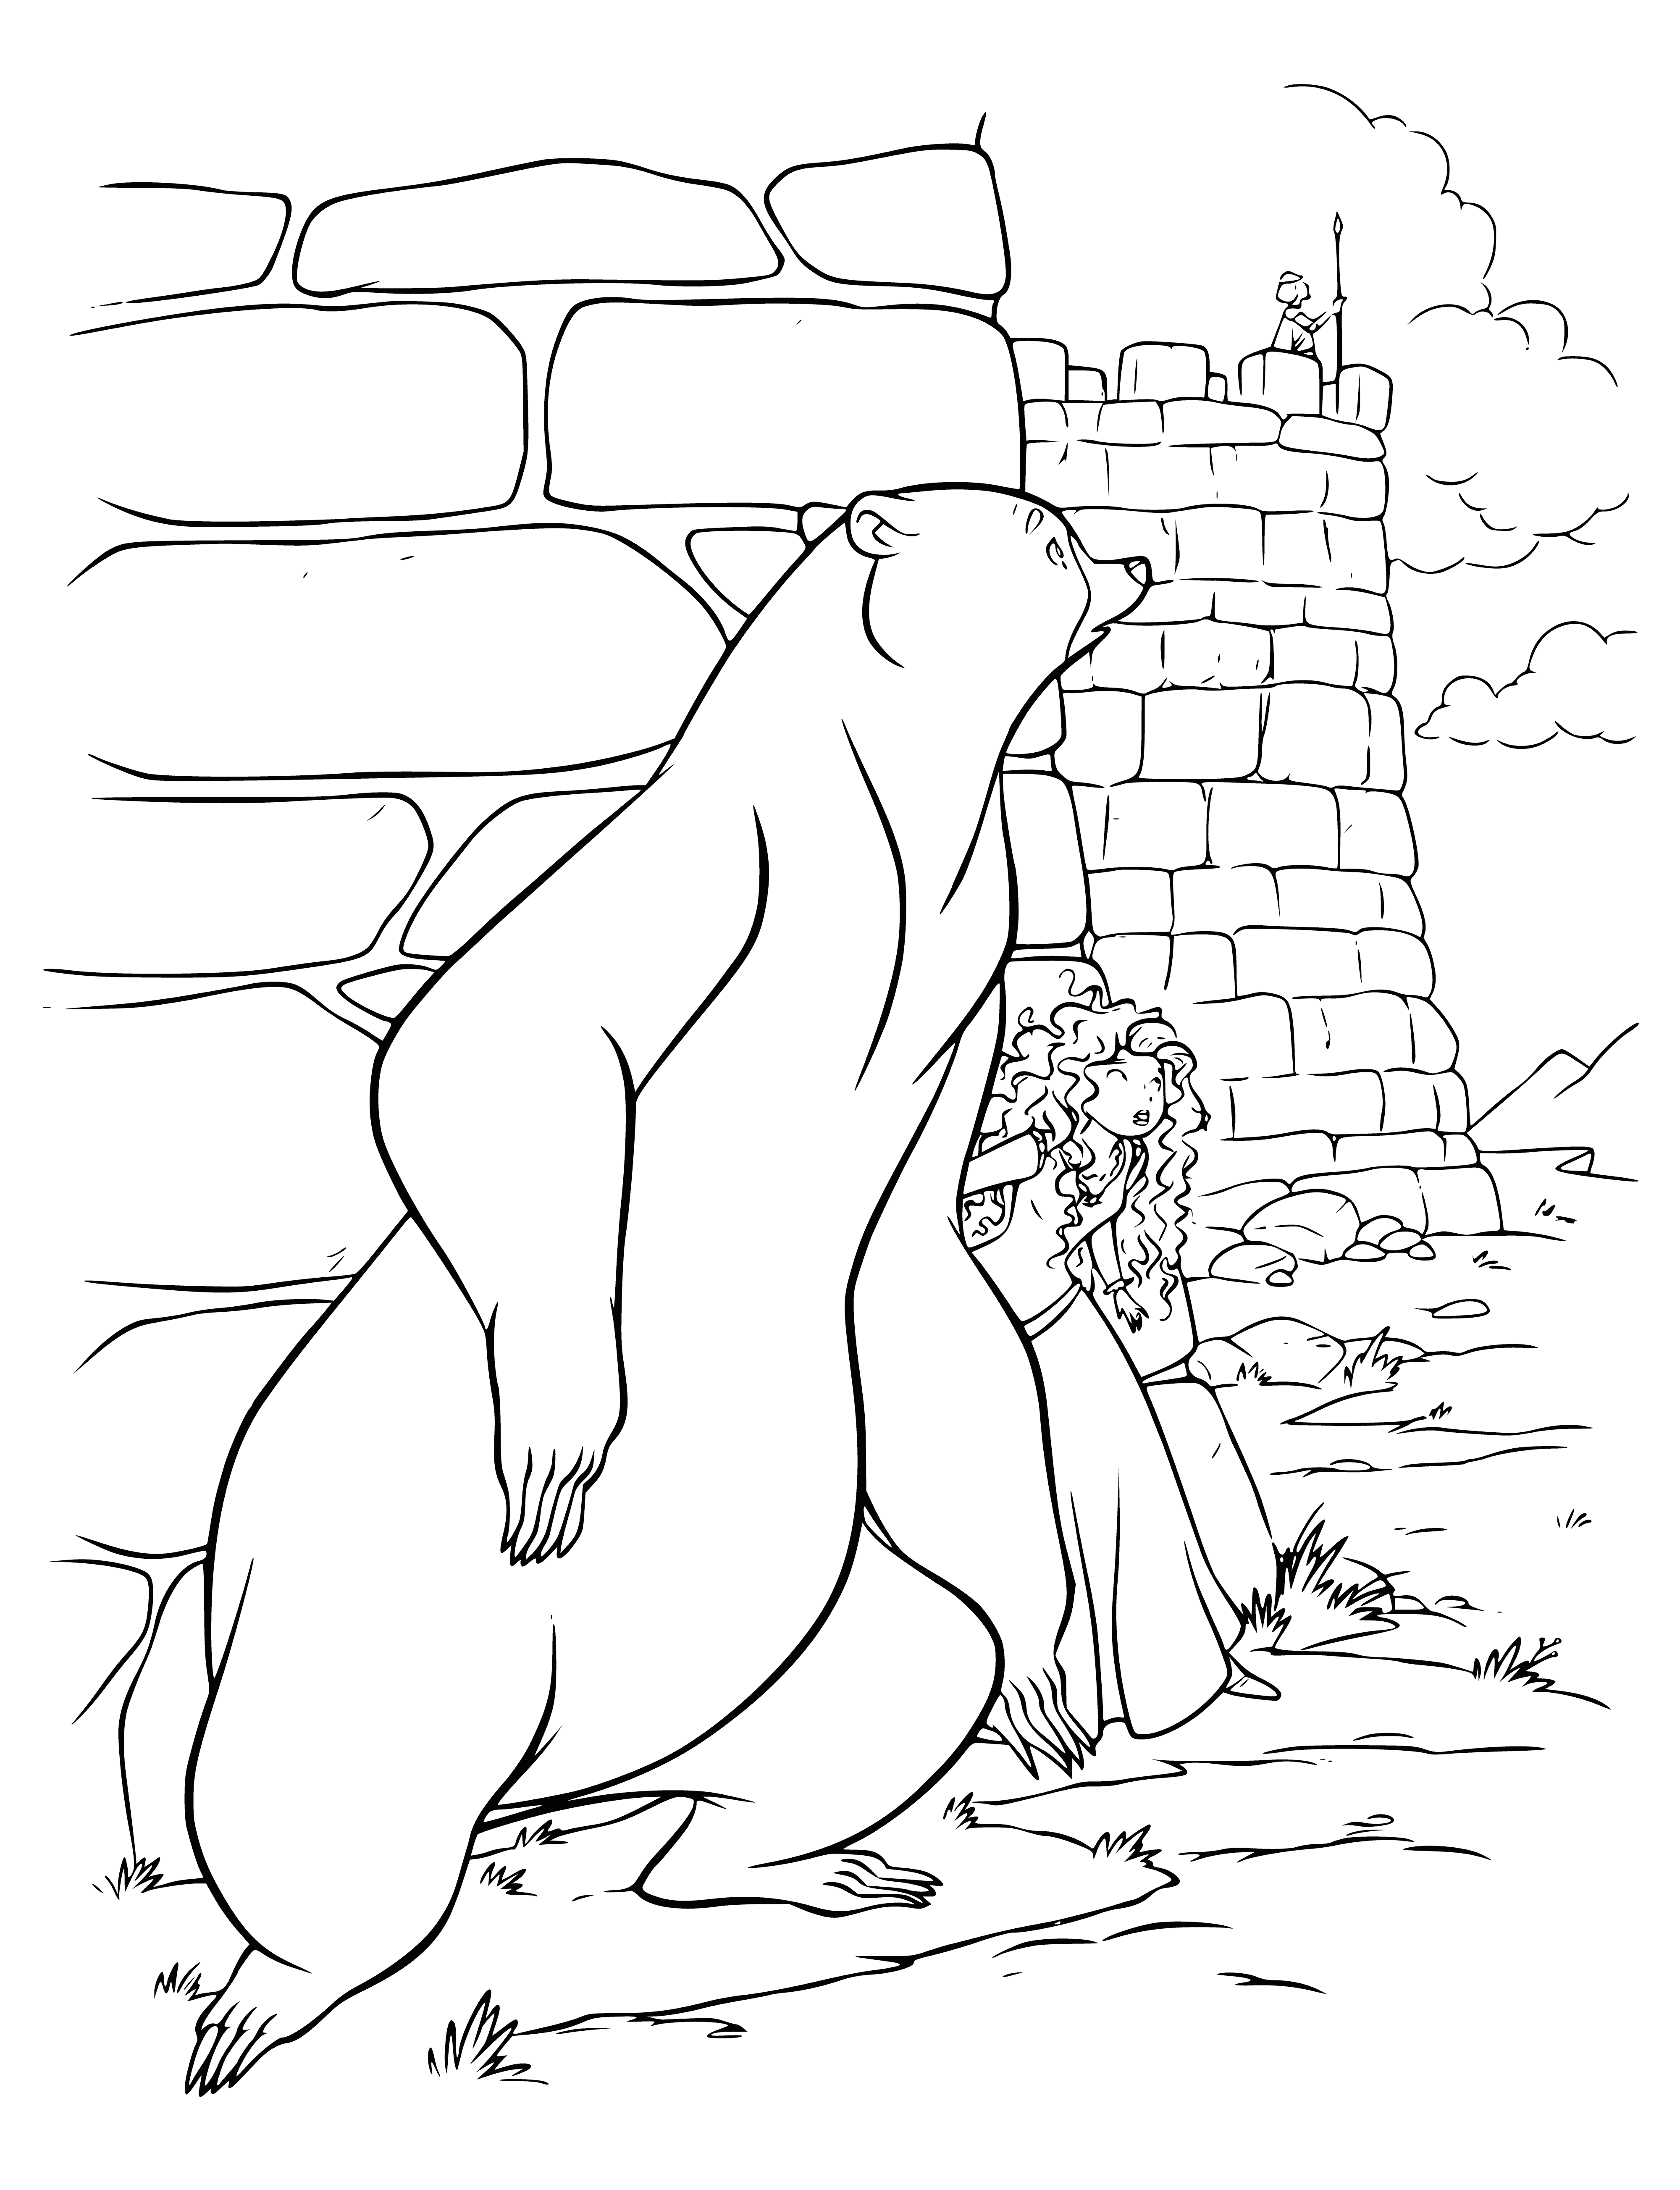 coloring page: Queen and Princess Merida hiding in dark forest; tall trees provide cover from unknown menace.